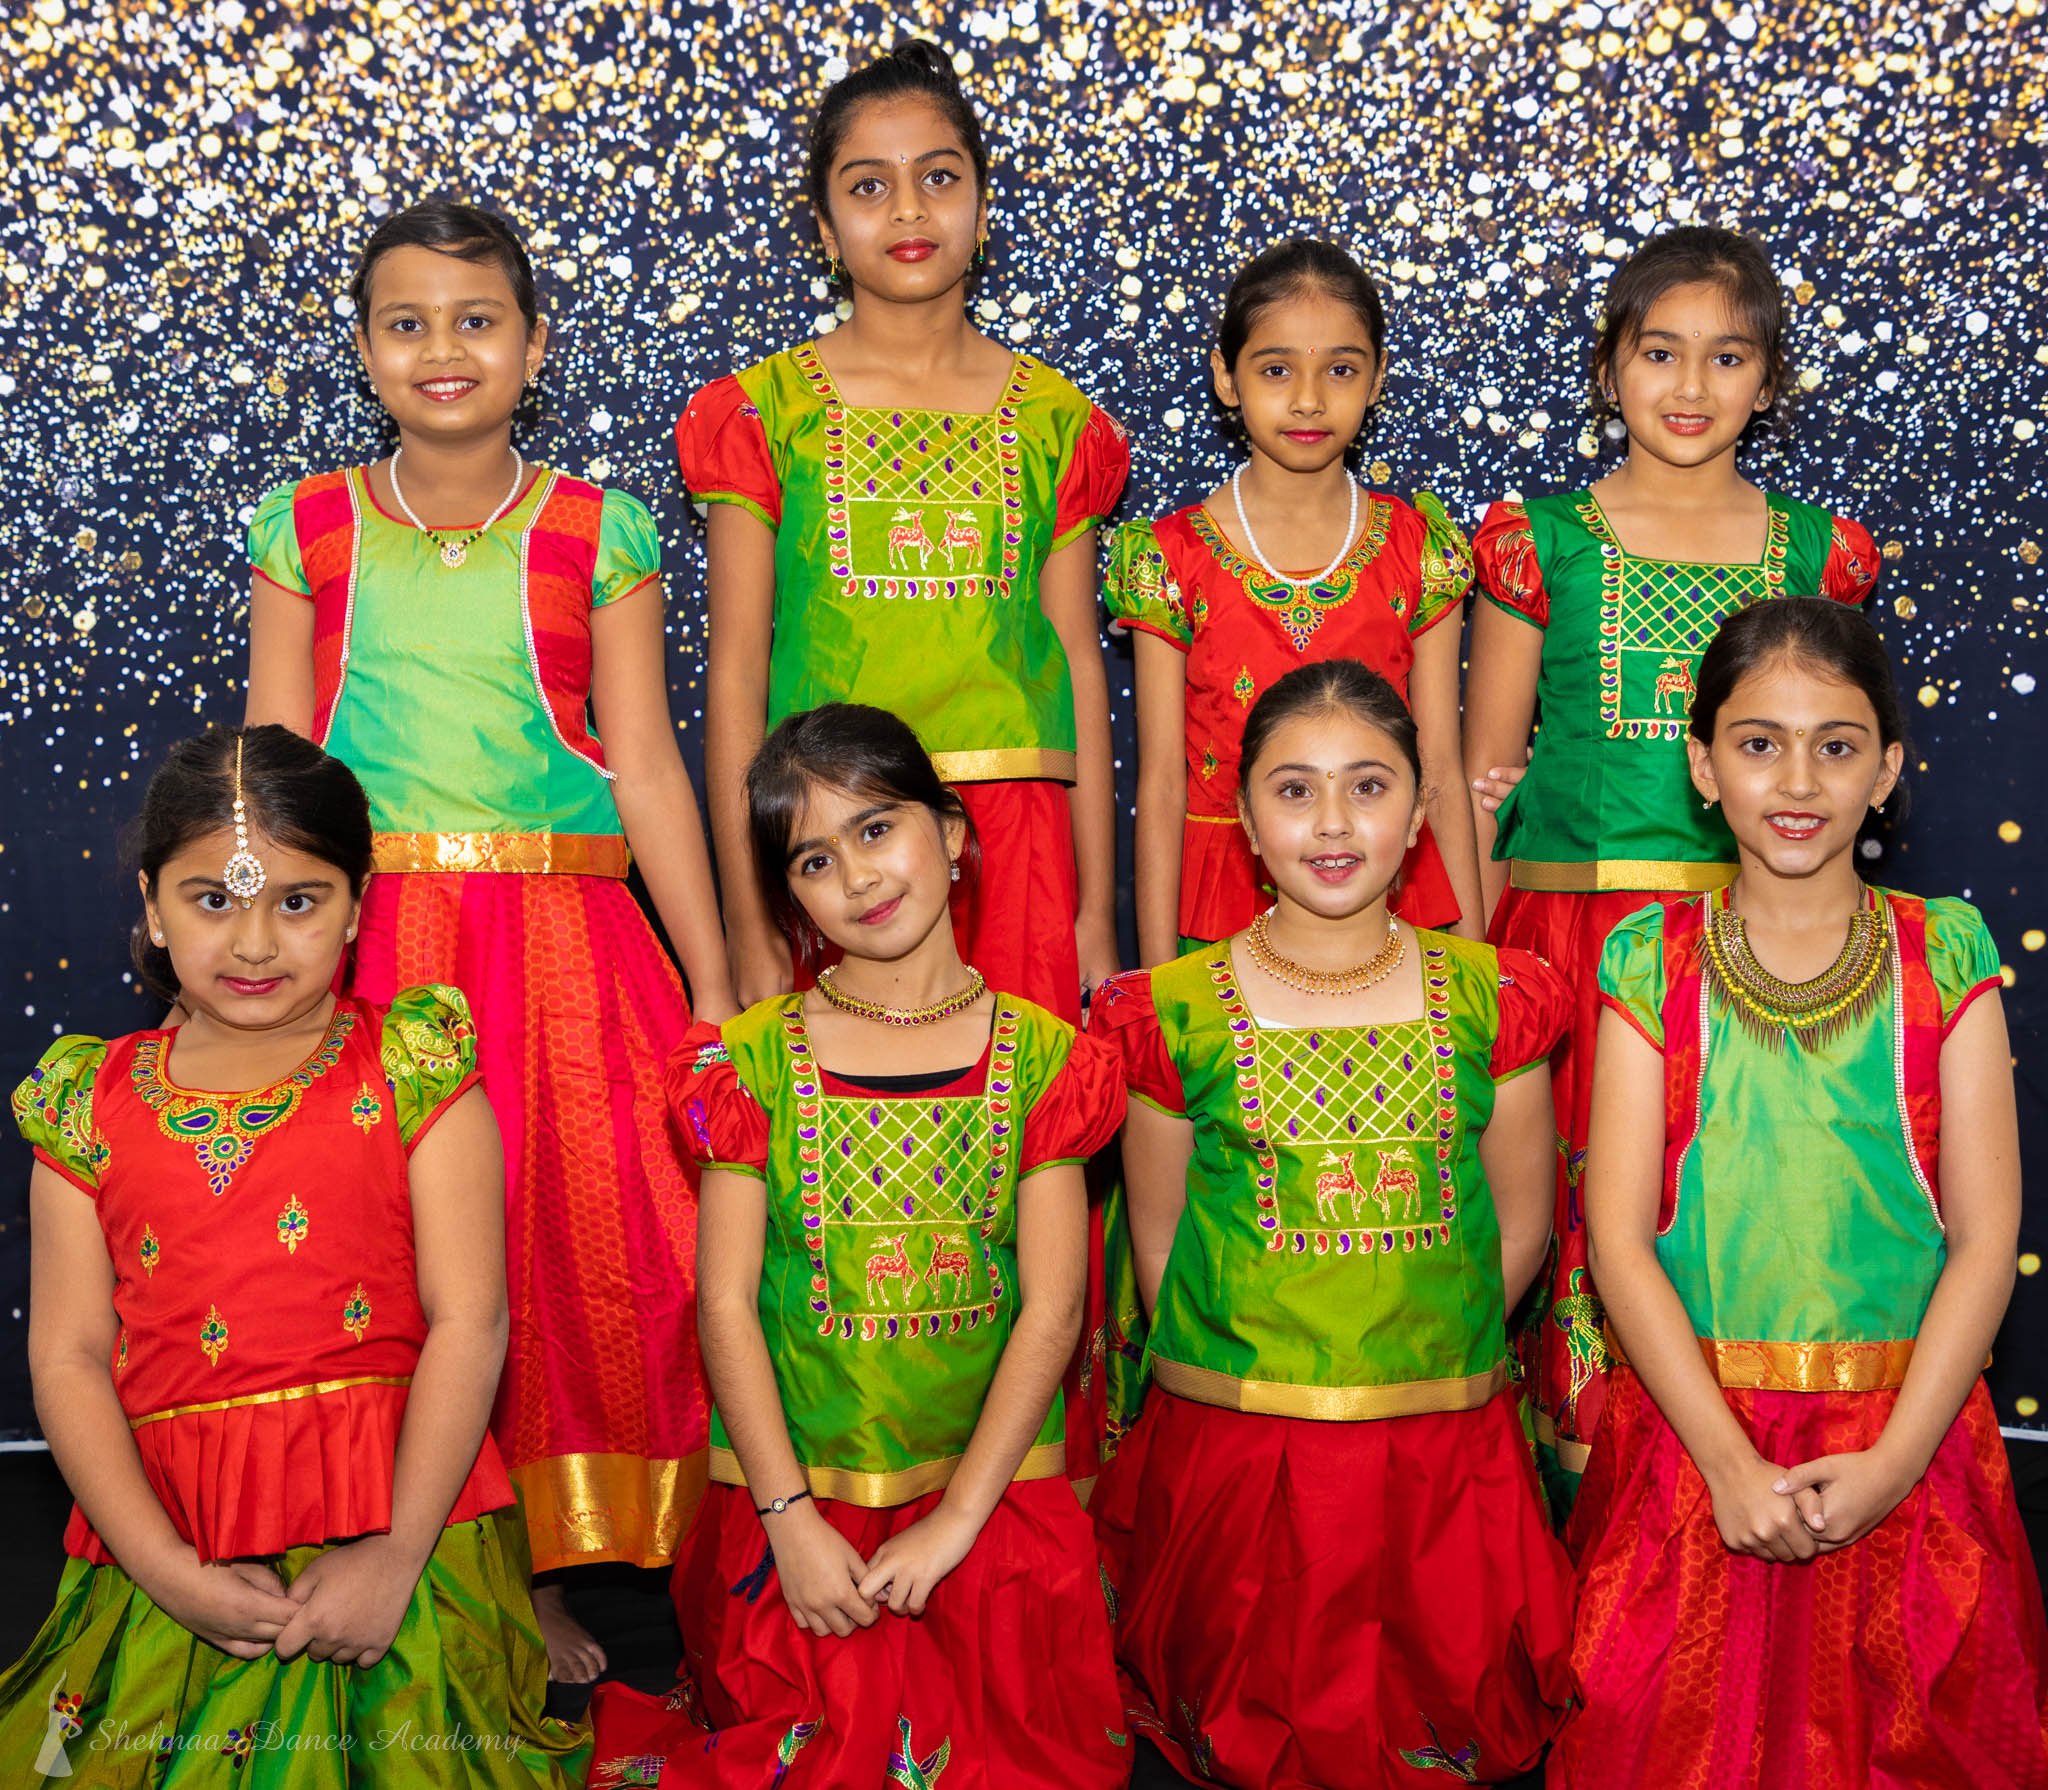 Diwali events in Jersey City - Indiansinjerseycity